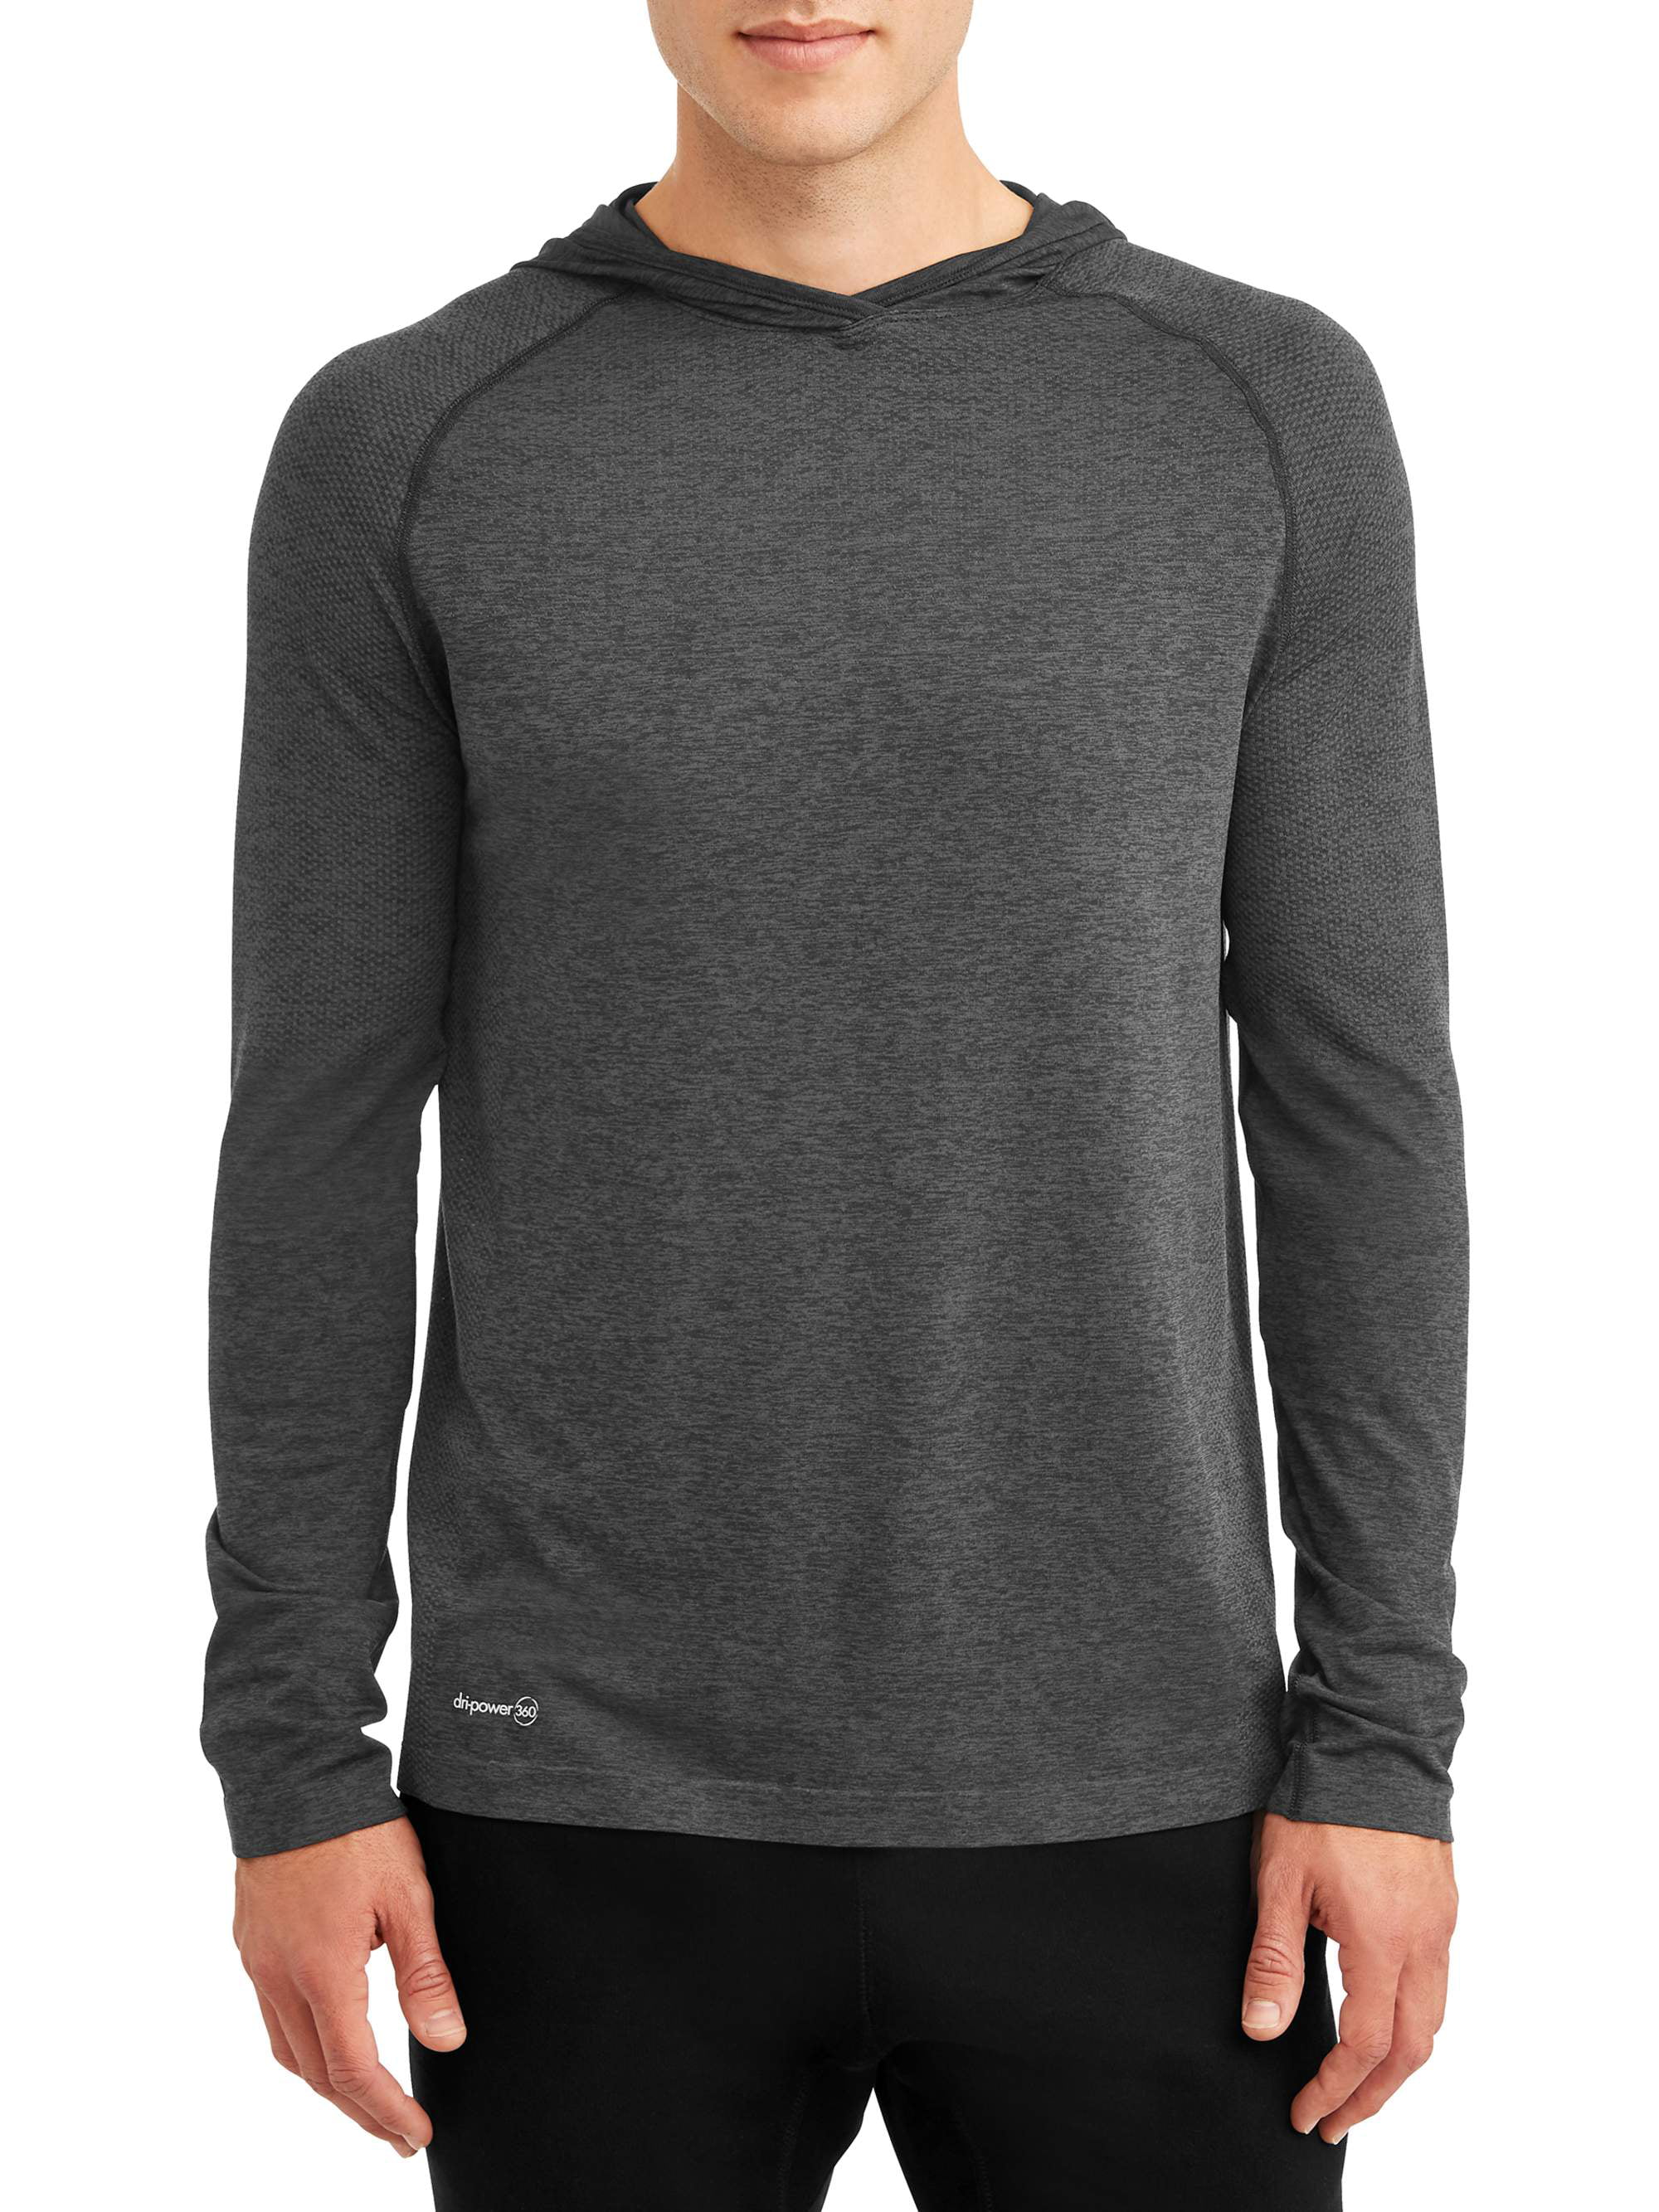 Russell - Russell Men's Active Seamless Hoodie, up to Size 2XL ...